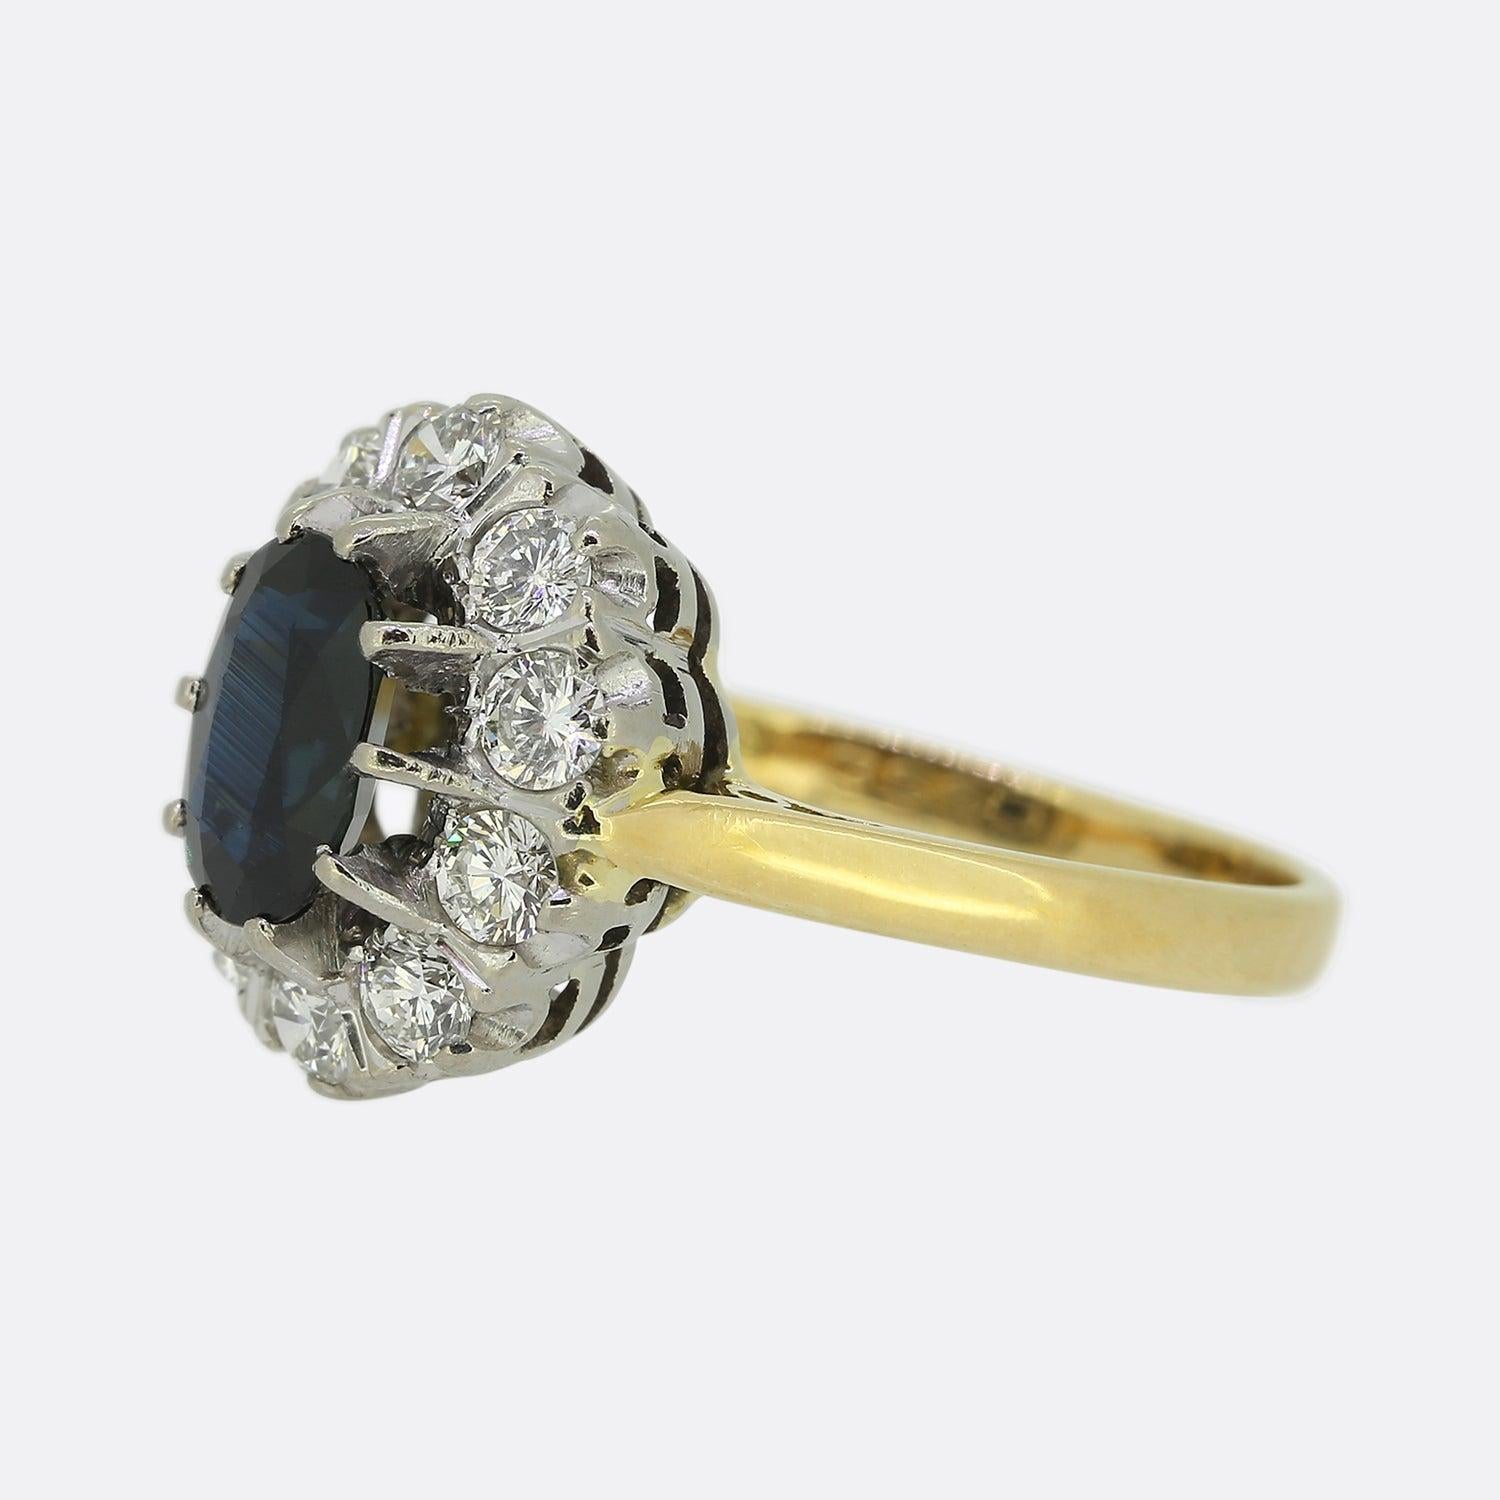 Here we have an 18ct yellow gold sapphire and diamond cluster ring. An oval shaped sapphire possessing a deep dark navy tone sits in a 10 clawed setting at the centre of the piece. This principle stone is then circulated and accentuated by a frame